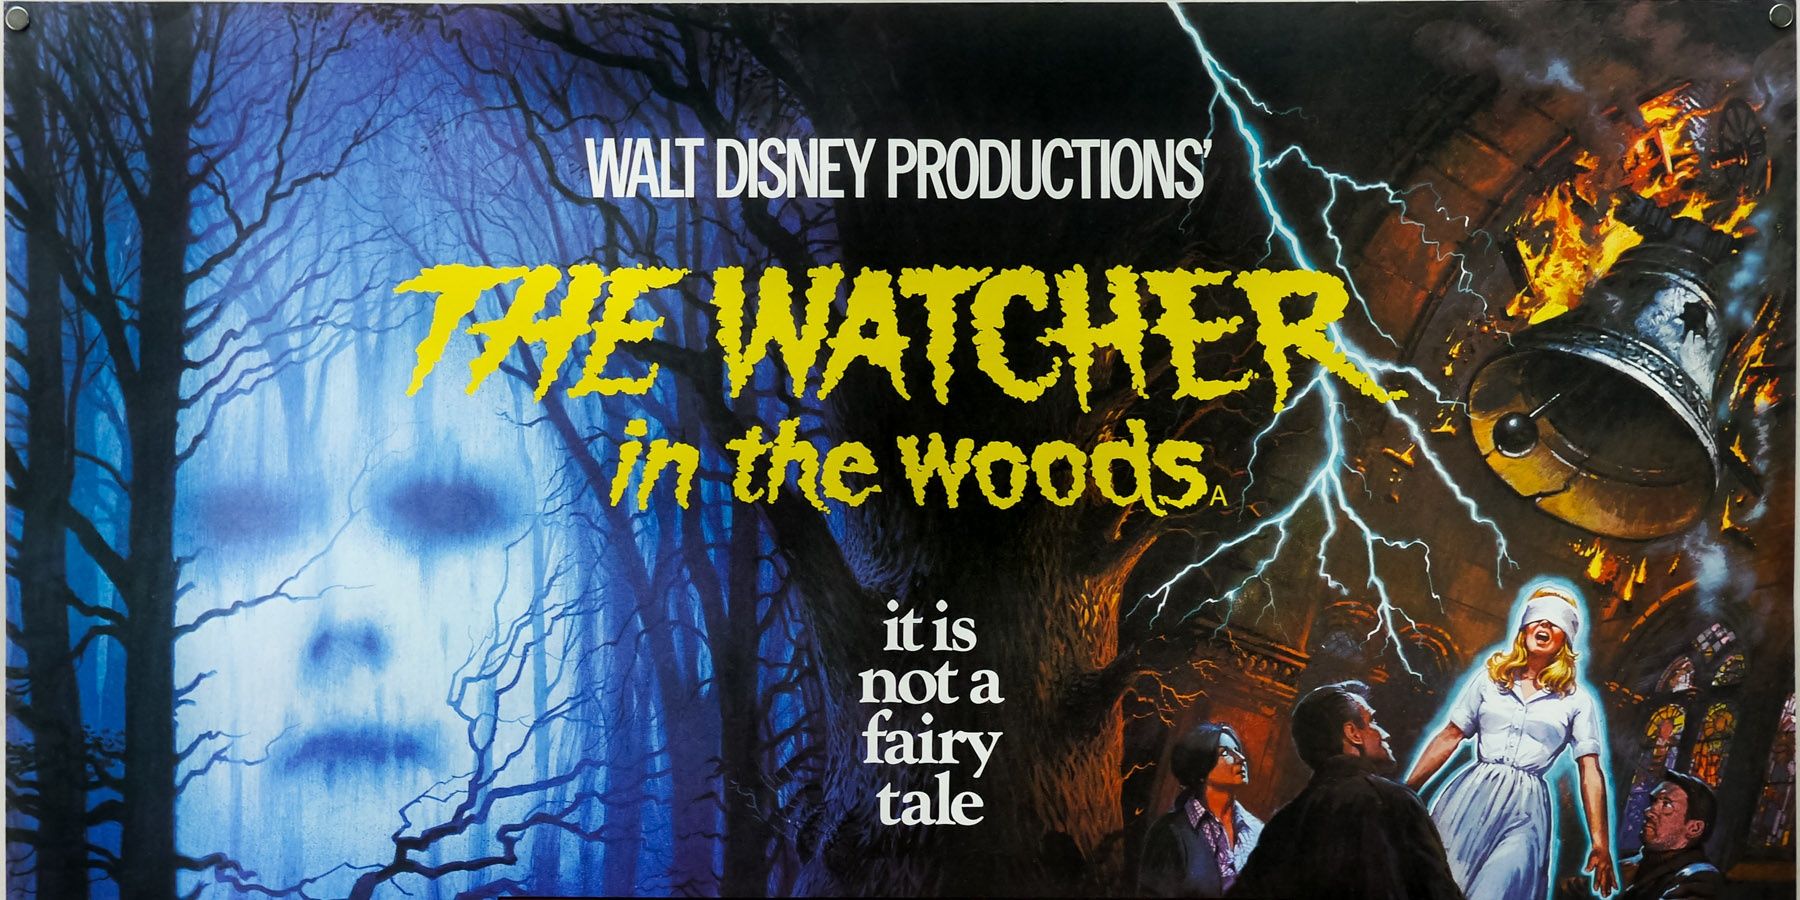 The Watcher in the Woods' Remake is Scarier Than the Original